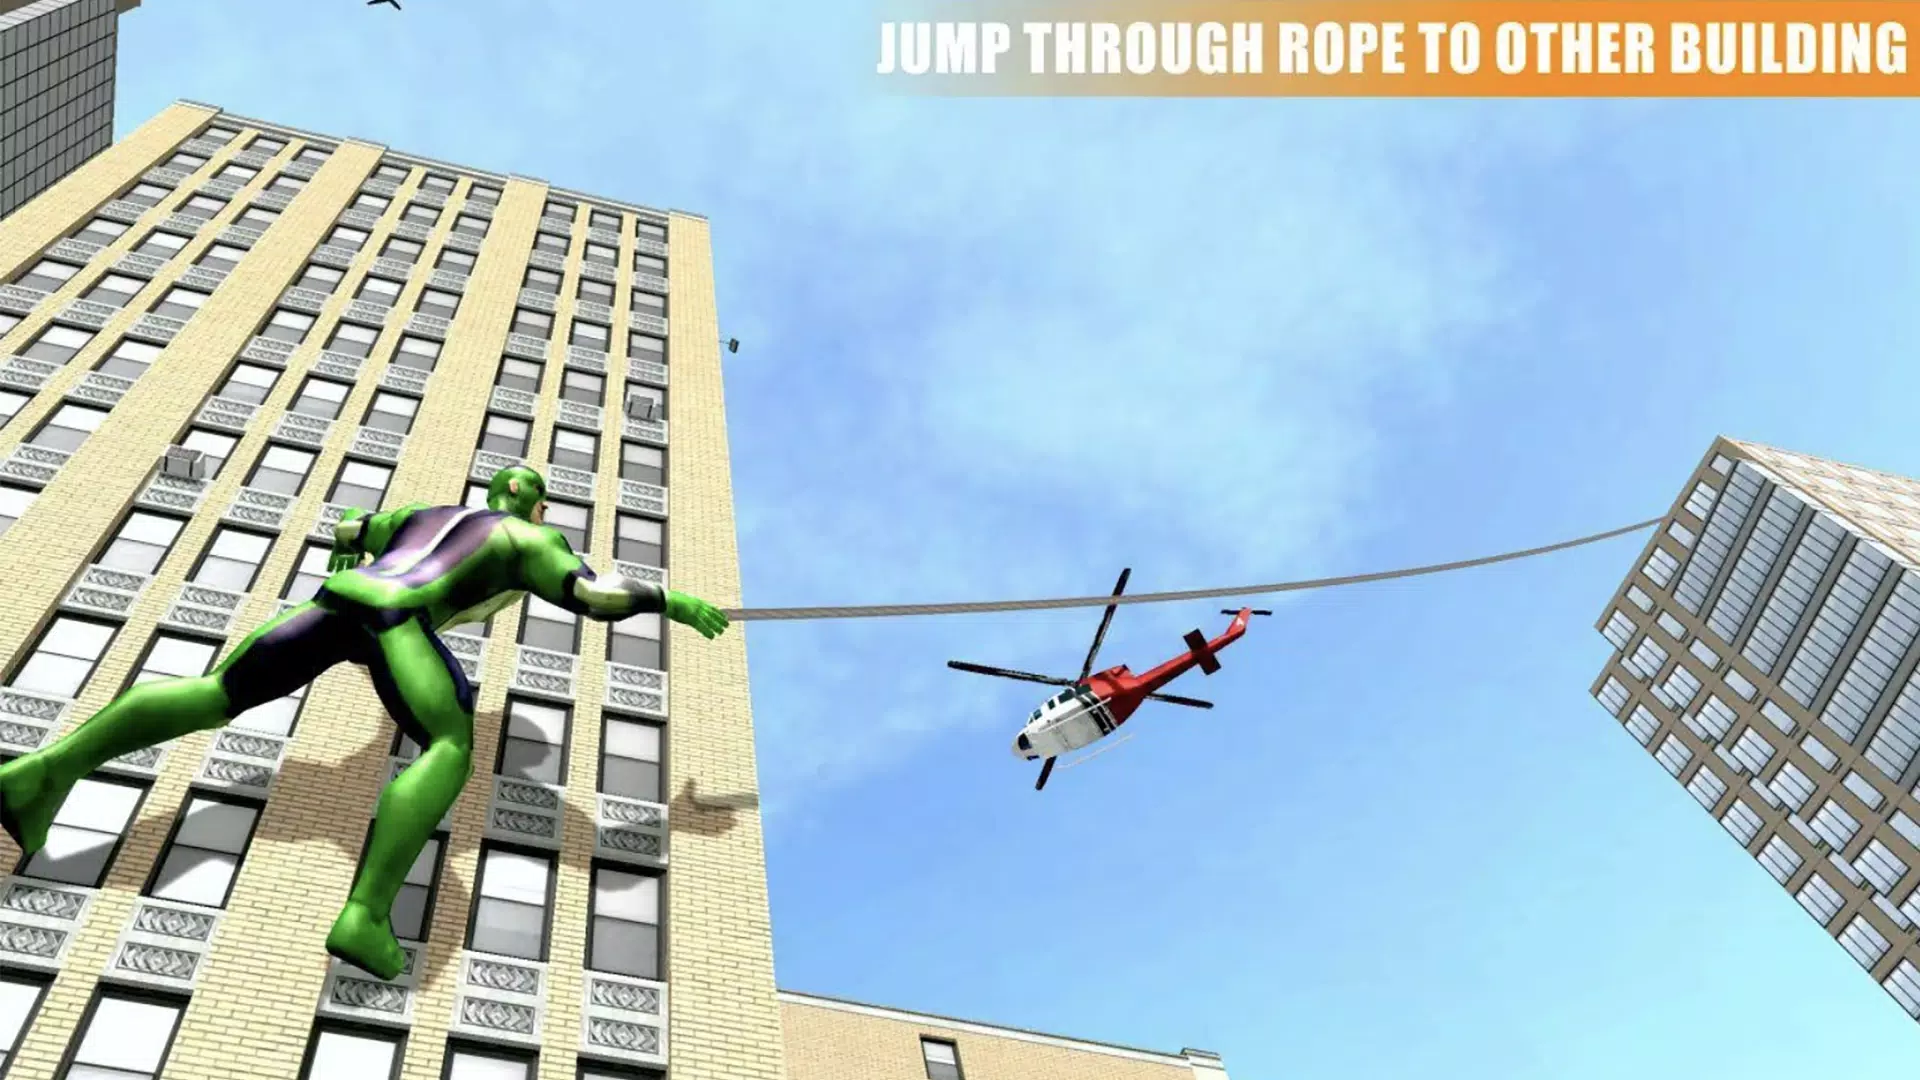 Miami Rope for Android - APK Download